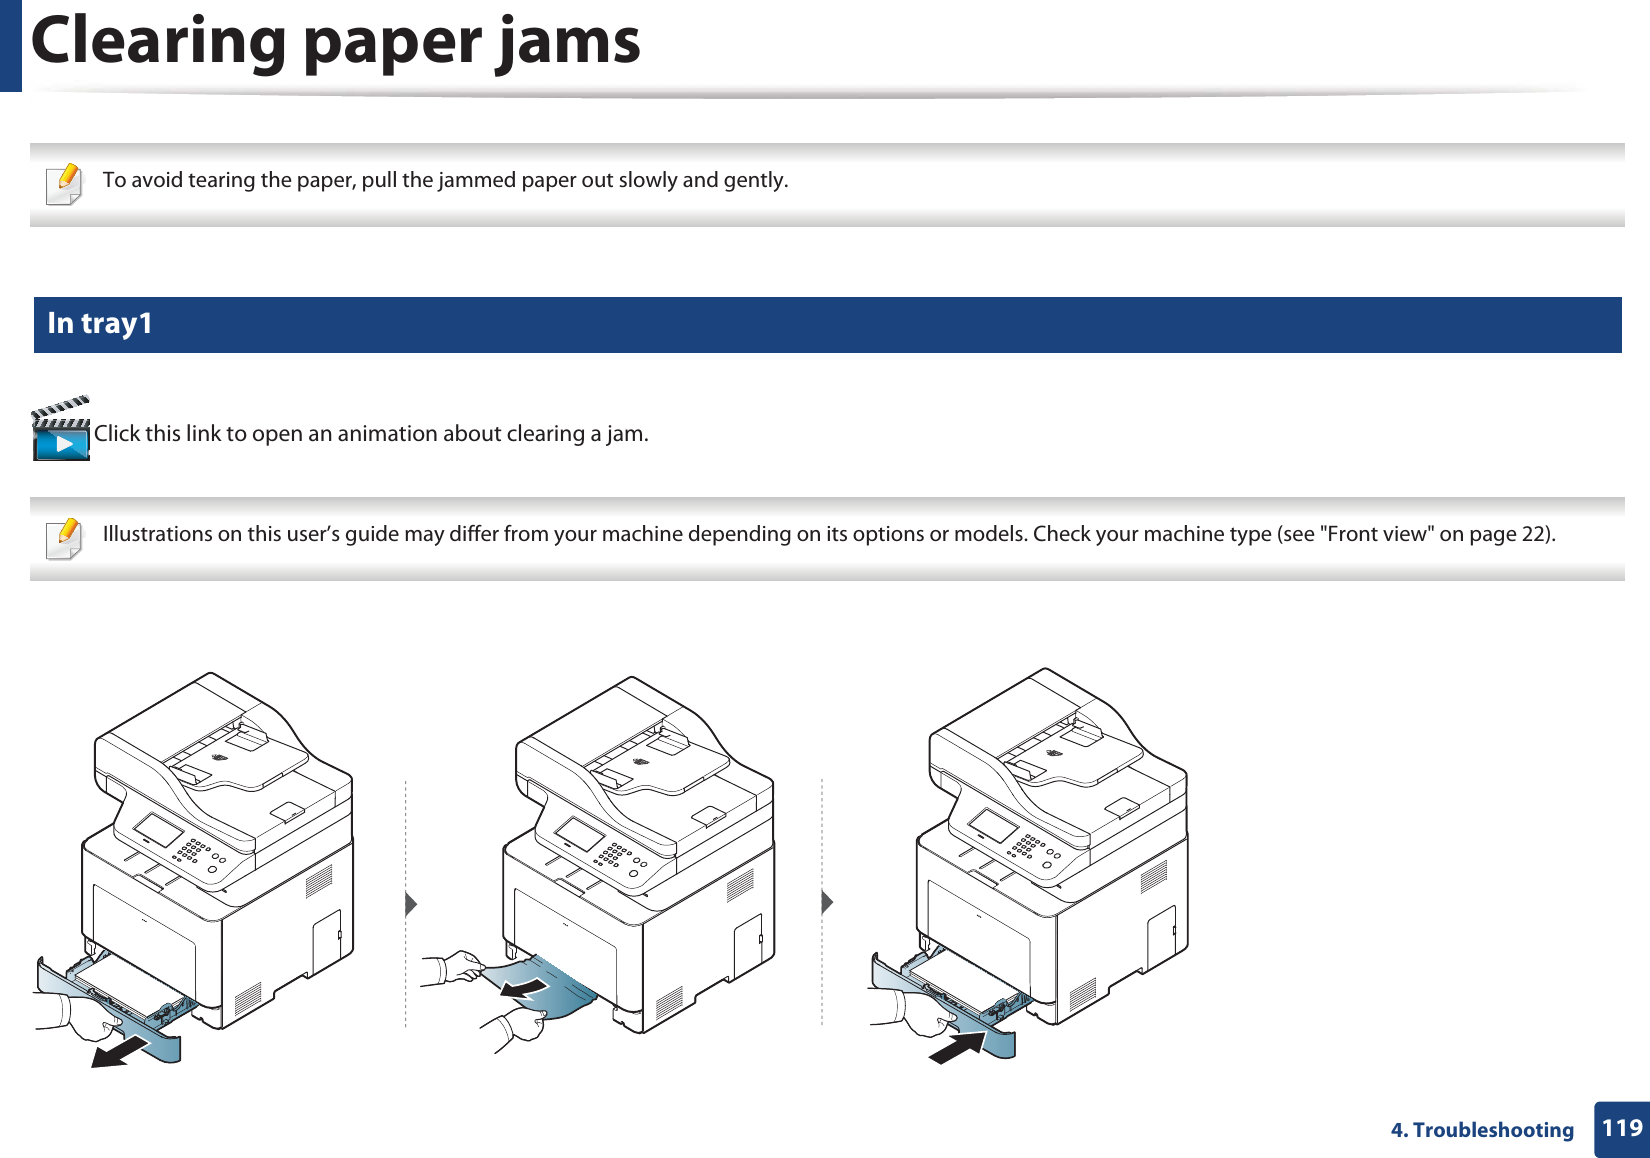 1194. TroubleshootingClearing paper jams To avoid tearing the paper, pull the jammed paper out slowly and gently.  5 In tray1 Click this link to open an animation about clearing a jam. Illustrations on this user’s guide may differ from your machine depending on its options or models. Check your machine type (see &quot;Front view&quot; on page 22). 